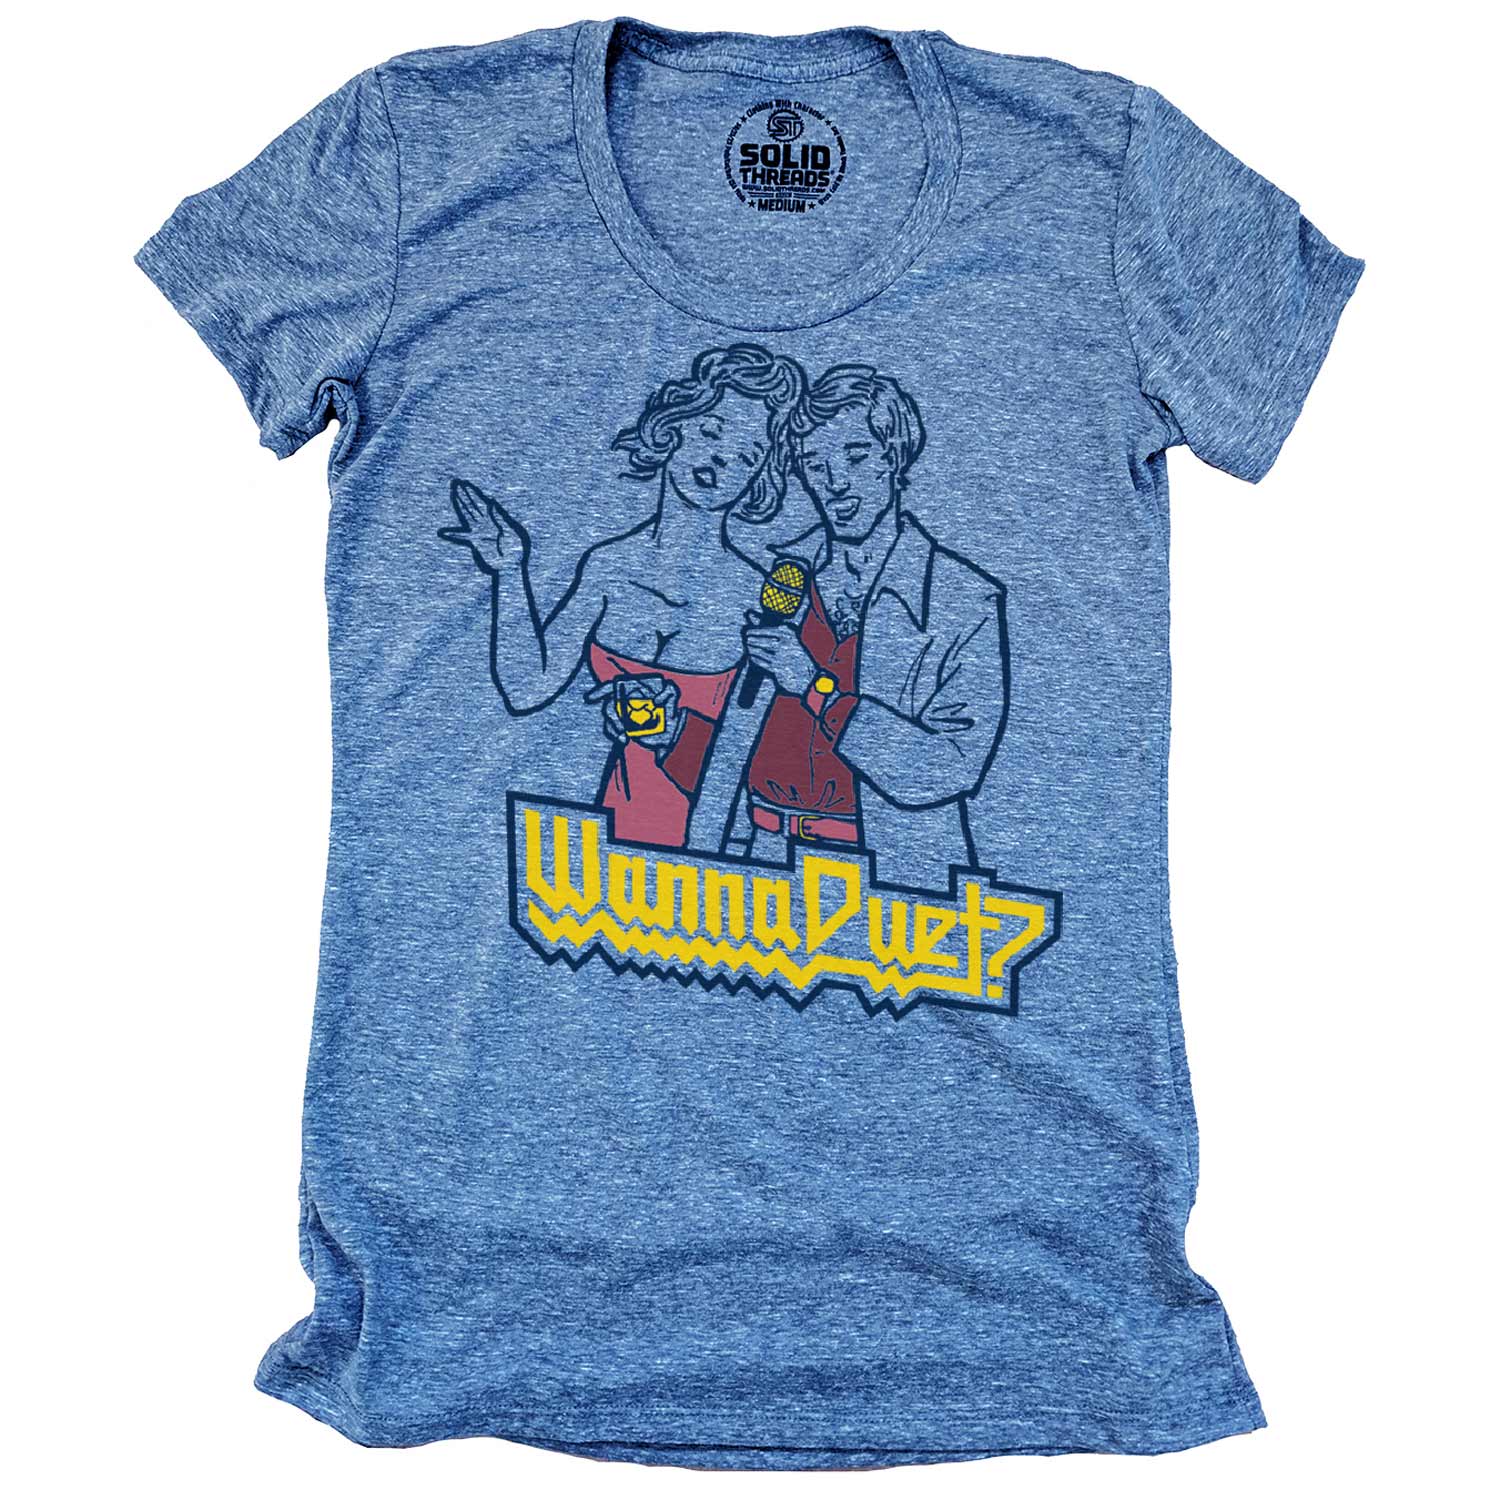 Women's Wanna Duet Vintage Graphic T-Shirt | Funny Karaoke Singing Tee | Solid Threads